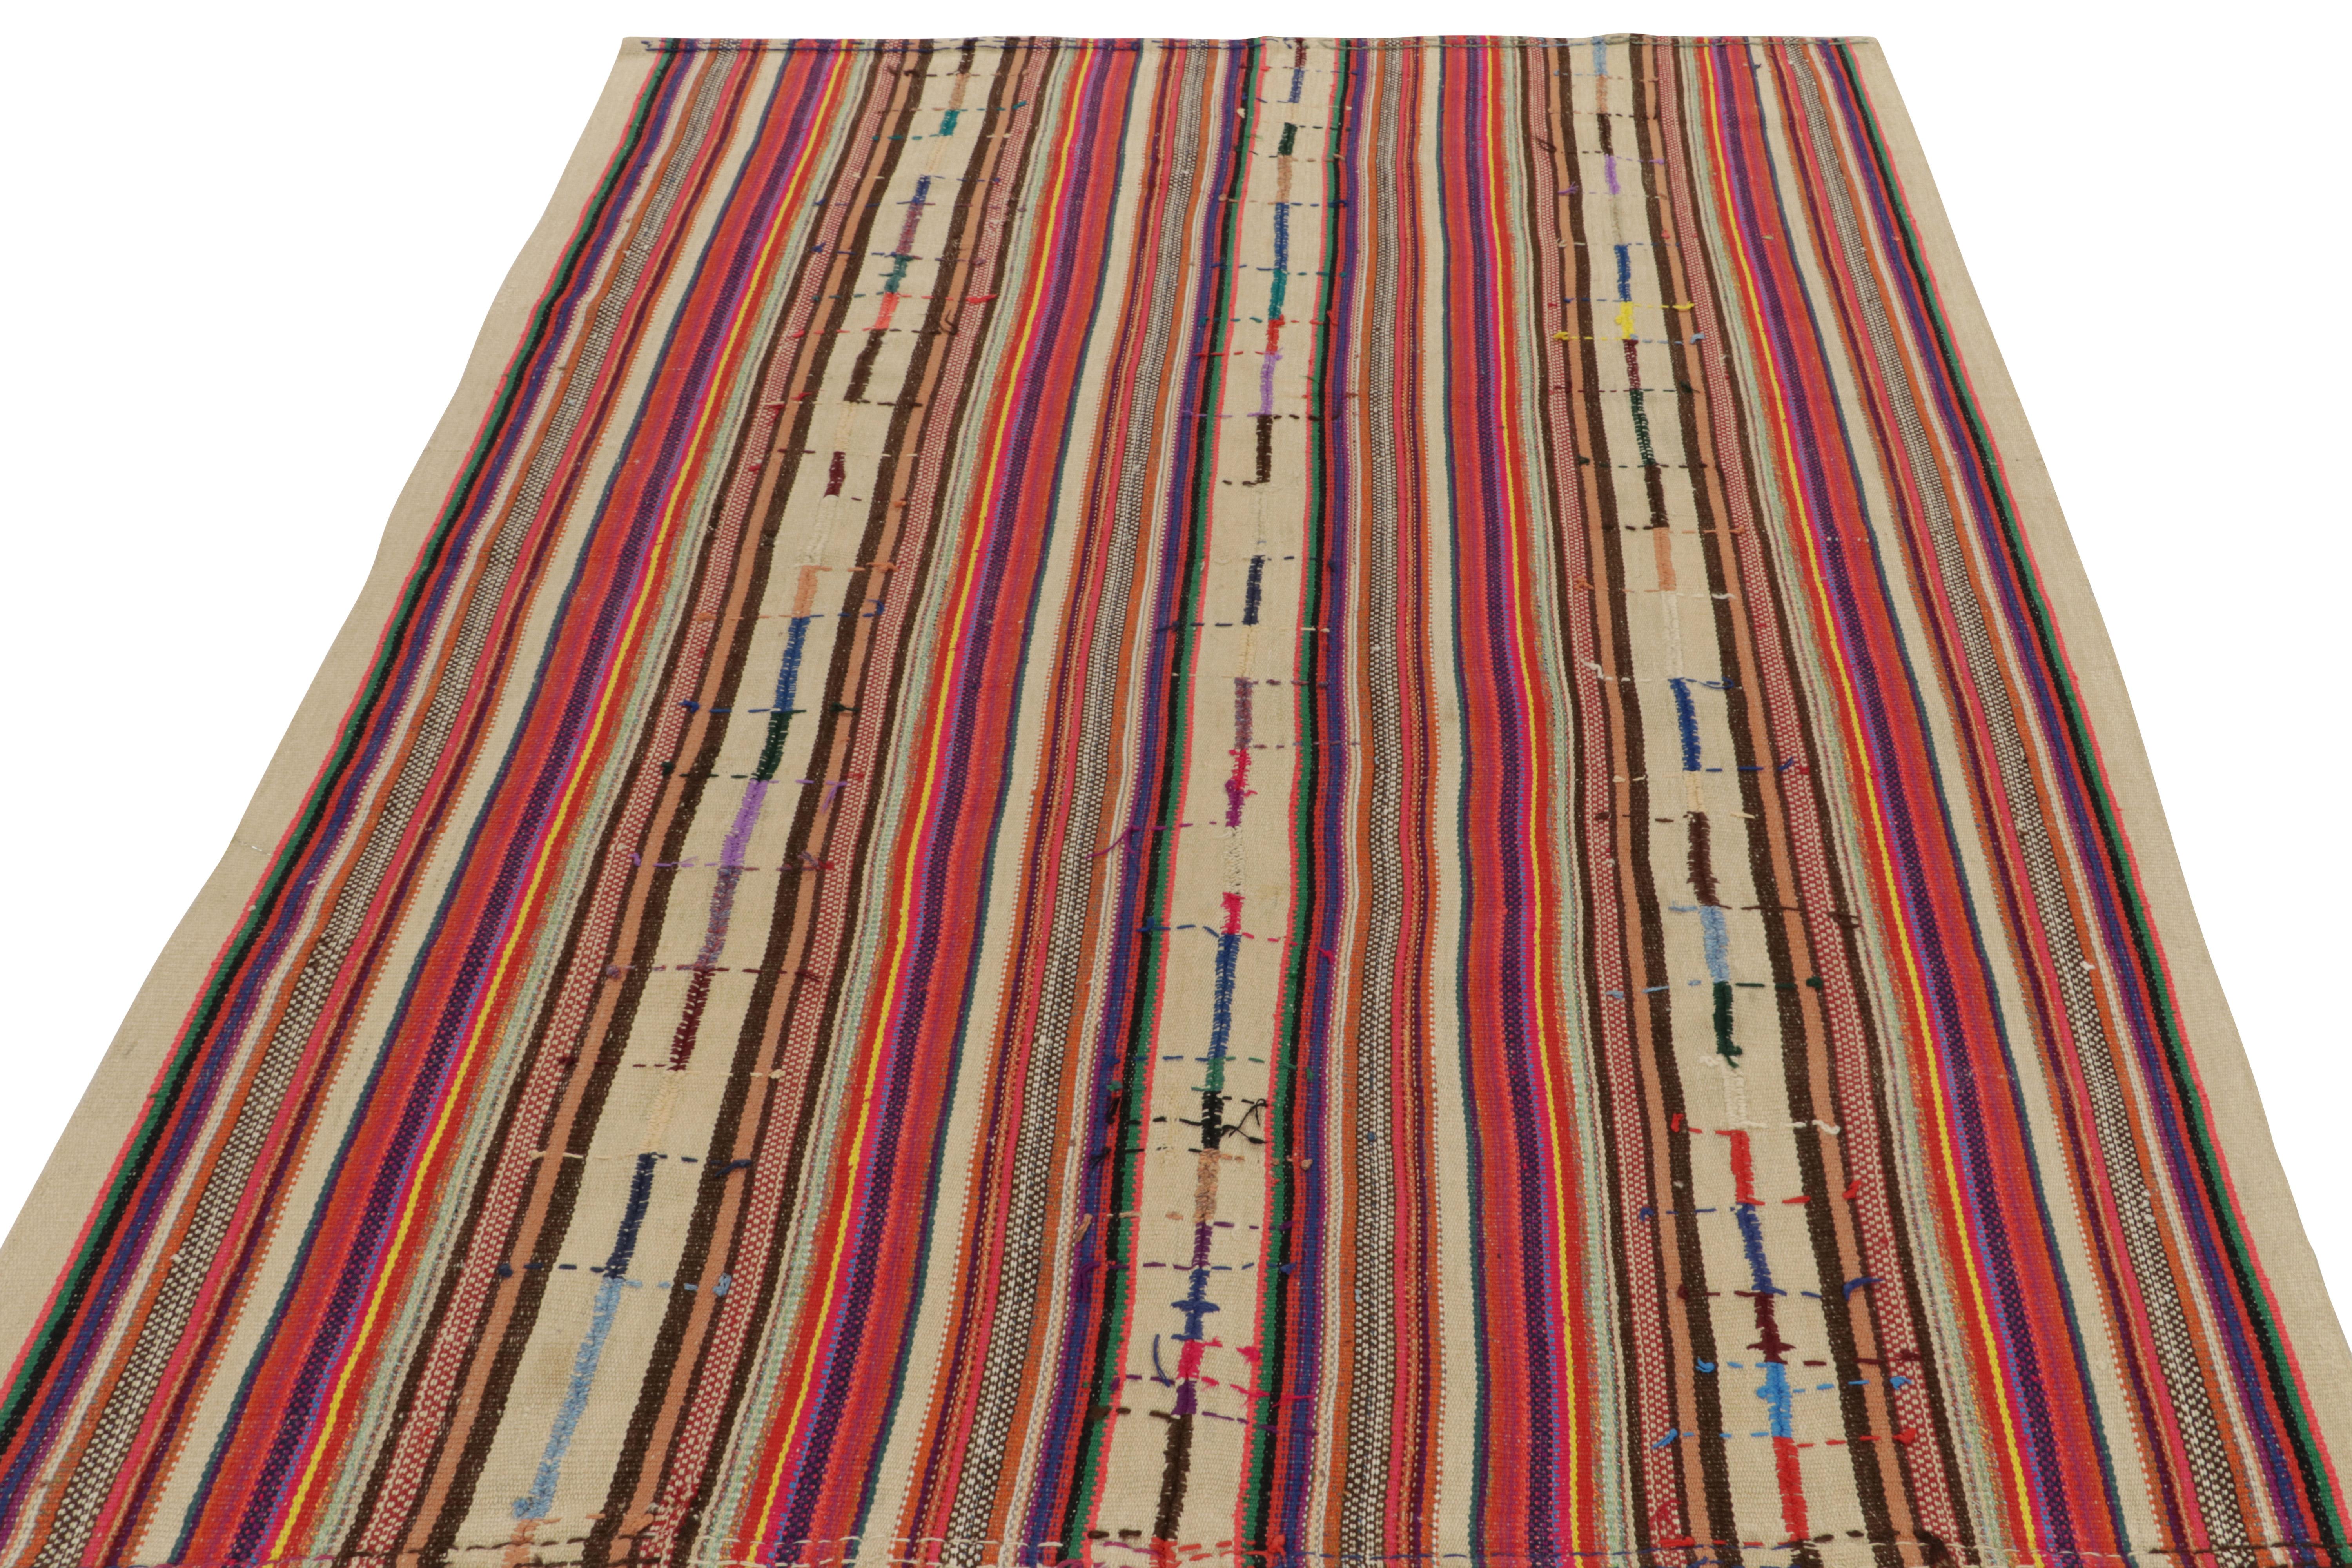 Originating from Turkey circa 1950-1960, a rare vintage chaput kilim rug style now entering our mid-century selections. 
Characterized by fine detailing with the colors within the polychromatic stripes, the lovely piece invites a departure from